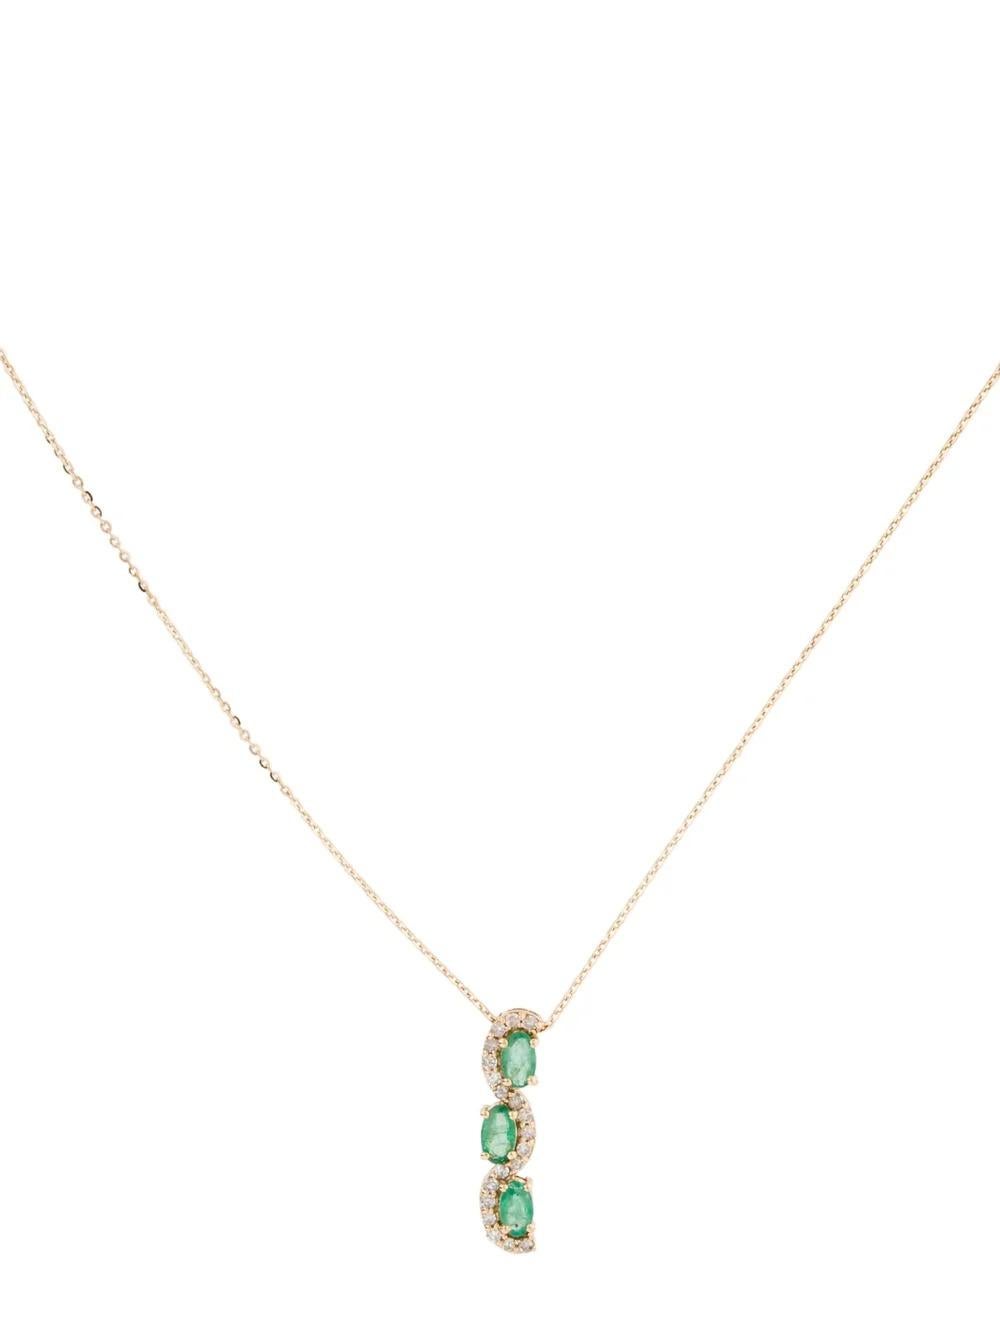 Indulge in luxury with our meticulously crafted 14K Yellow Gold Emerald & Diamond Pendant Necklace. This stunning necklace is adorned with a trio of mesmerizing gemstones, including a 0.423 Carat Oval Brilliant Emerald and 0.15 Carats of dazzling